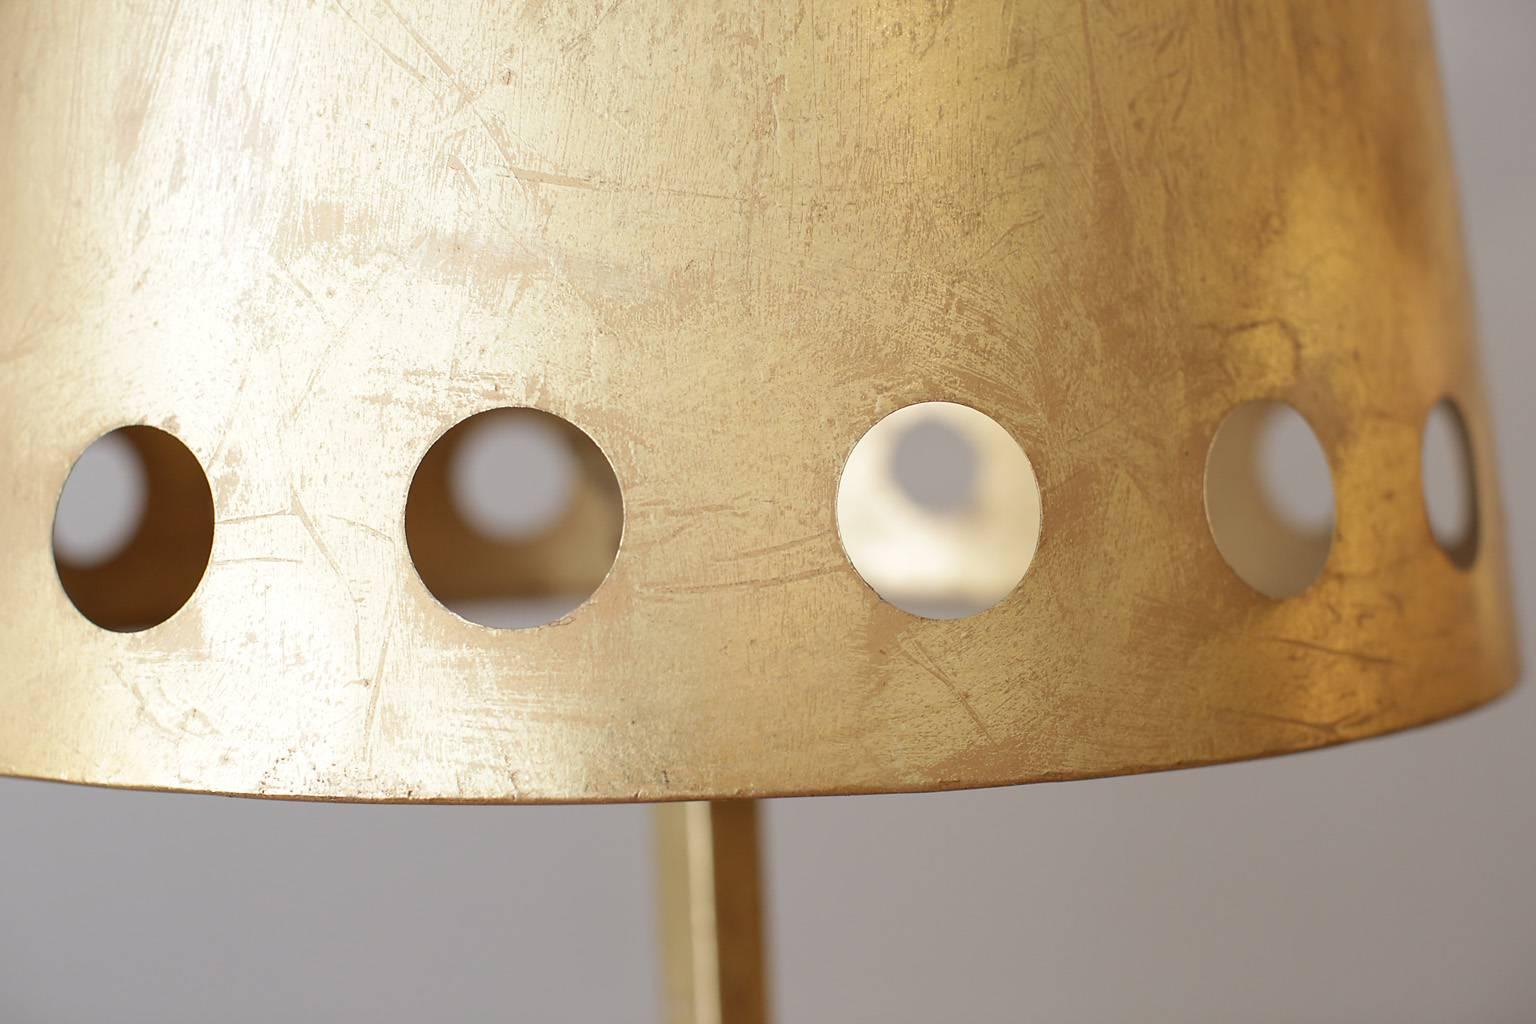 Gold leafed metal floor lamp with metal shade.